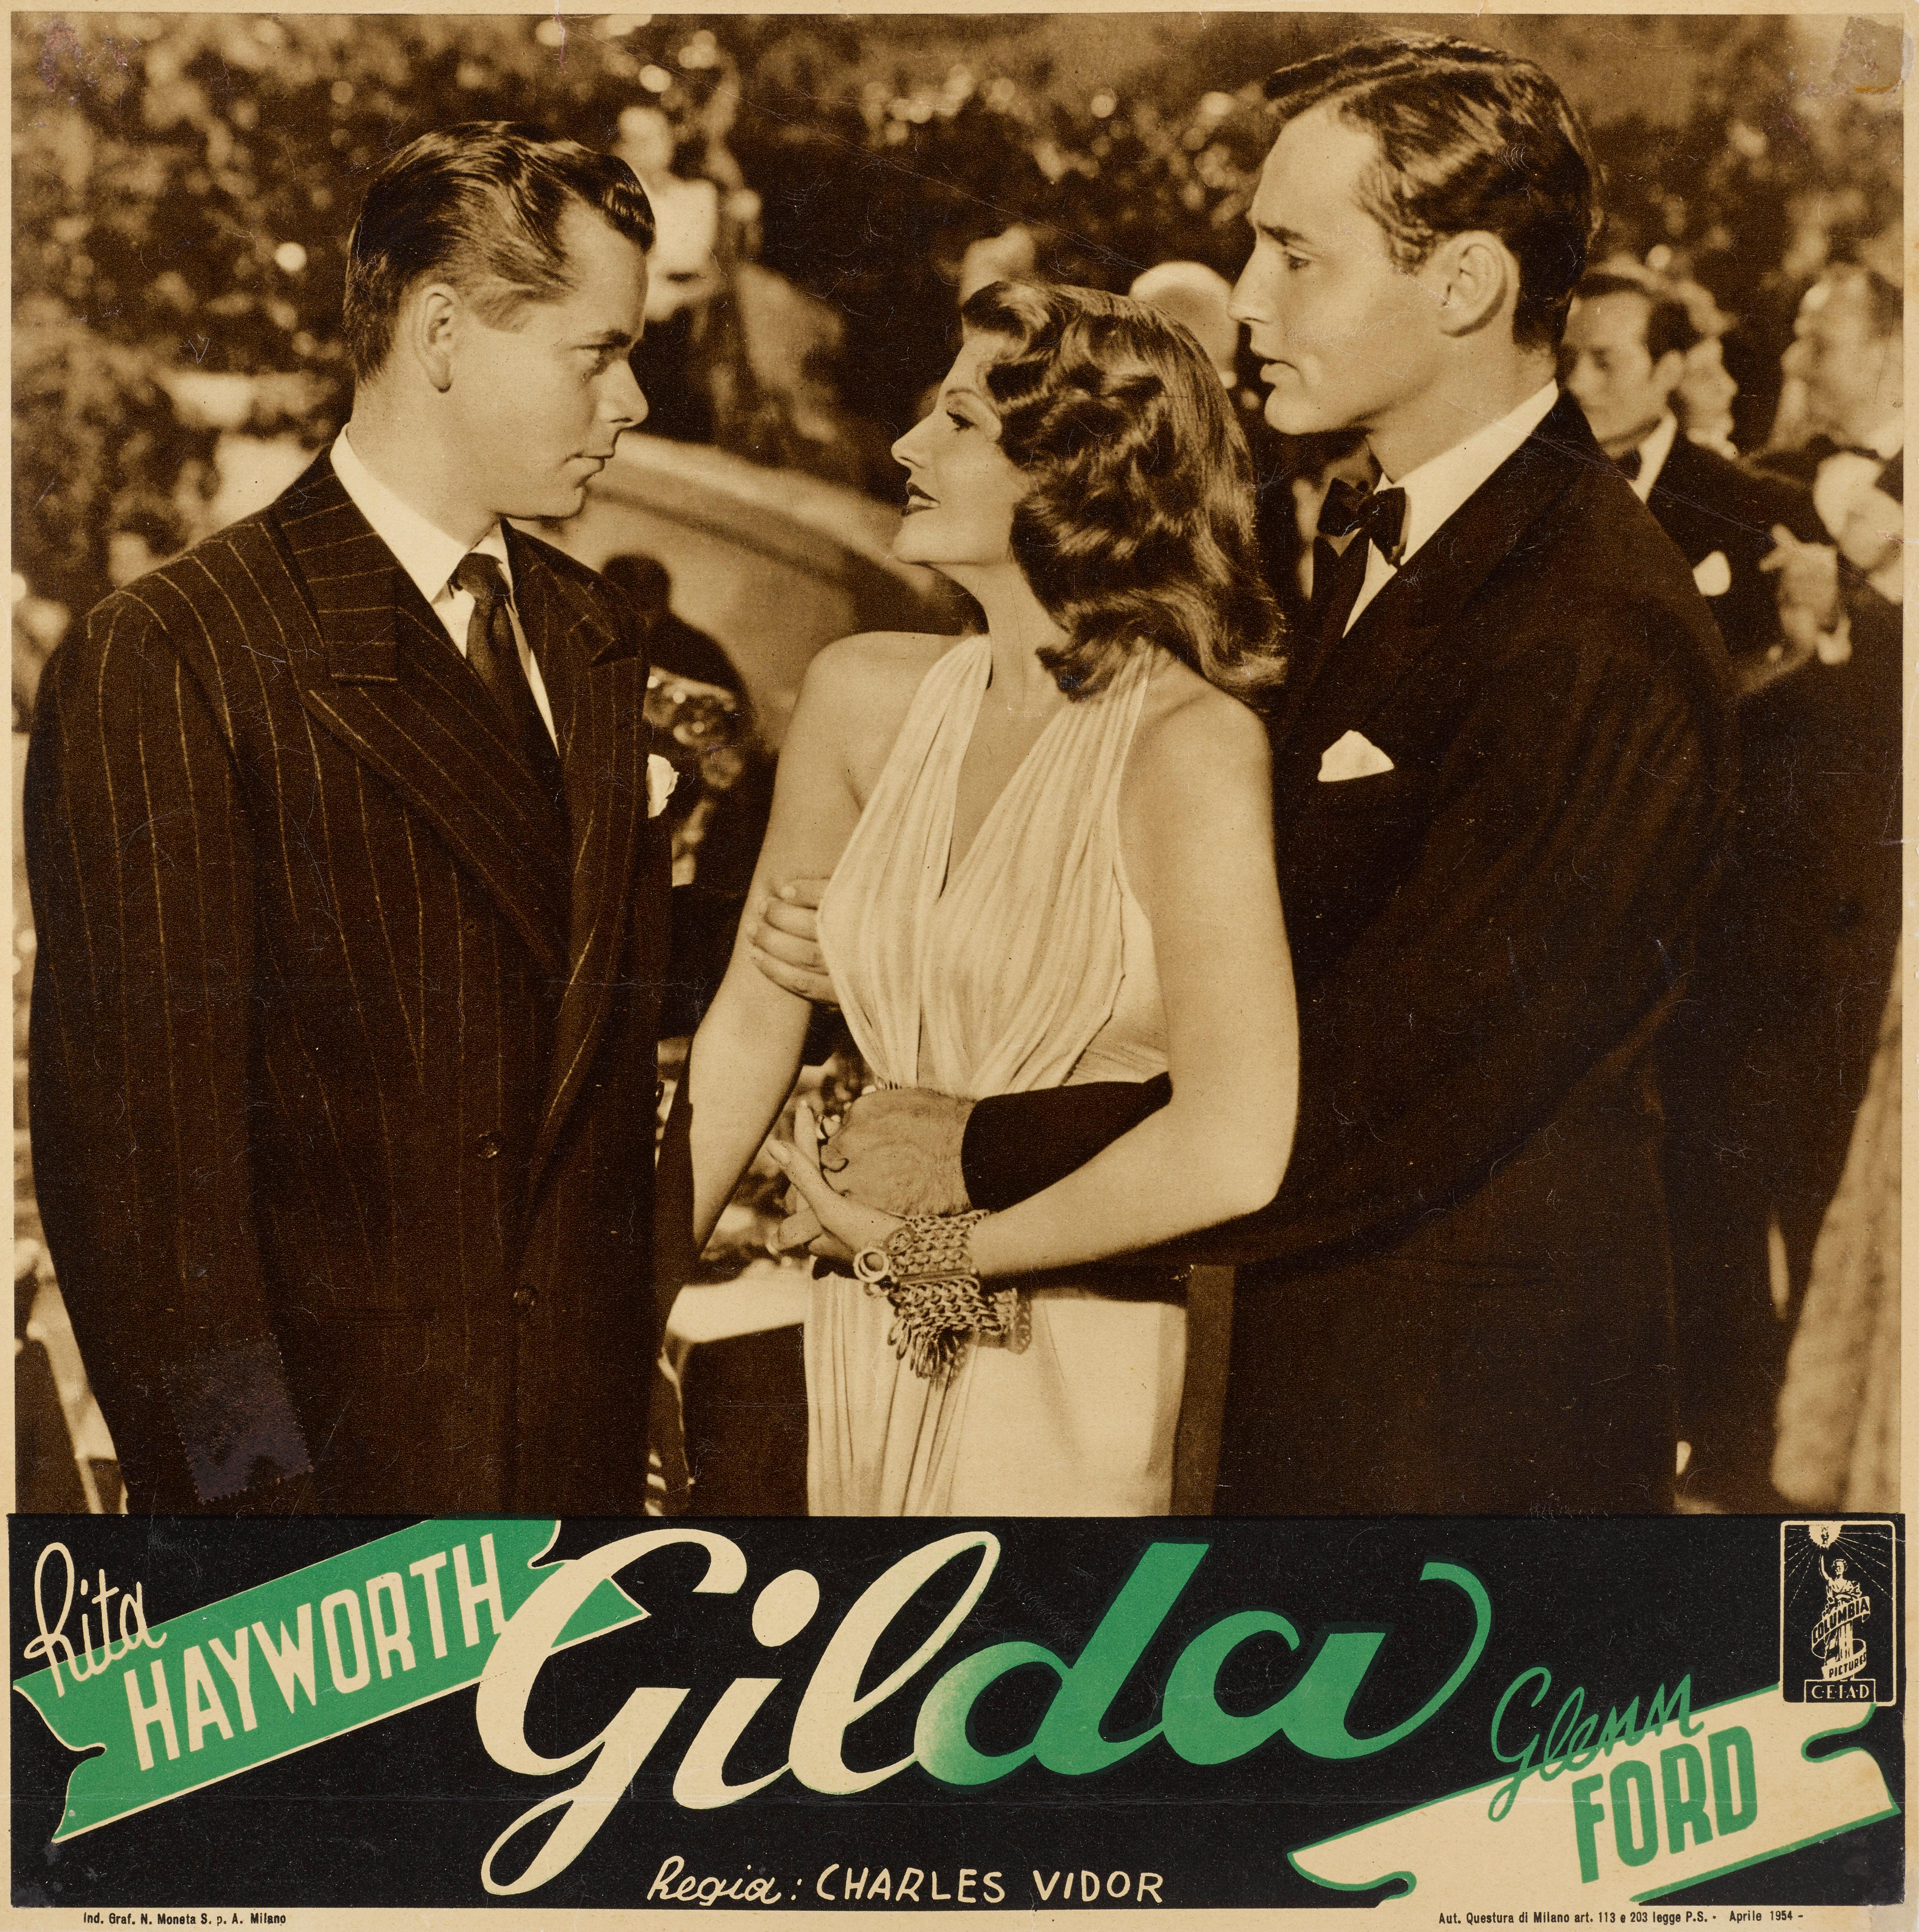 Original Italian film poster designed for use in the cinemas lobby. This classic 1946 Film Noir starred Rita Hayworth, Glenn Ford and was directed by Charles Vidor.